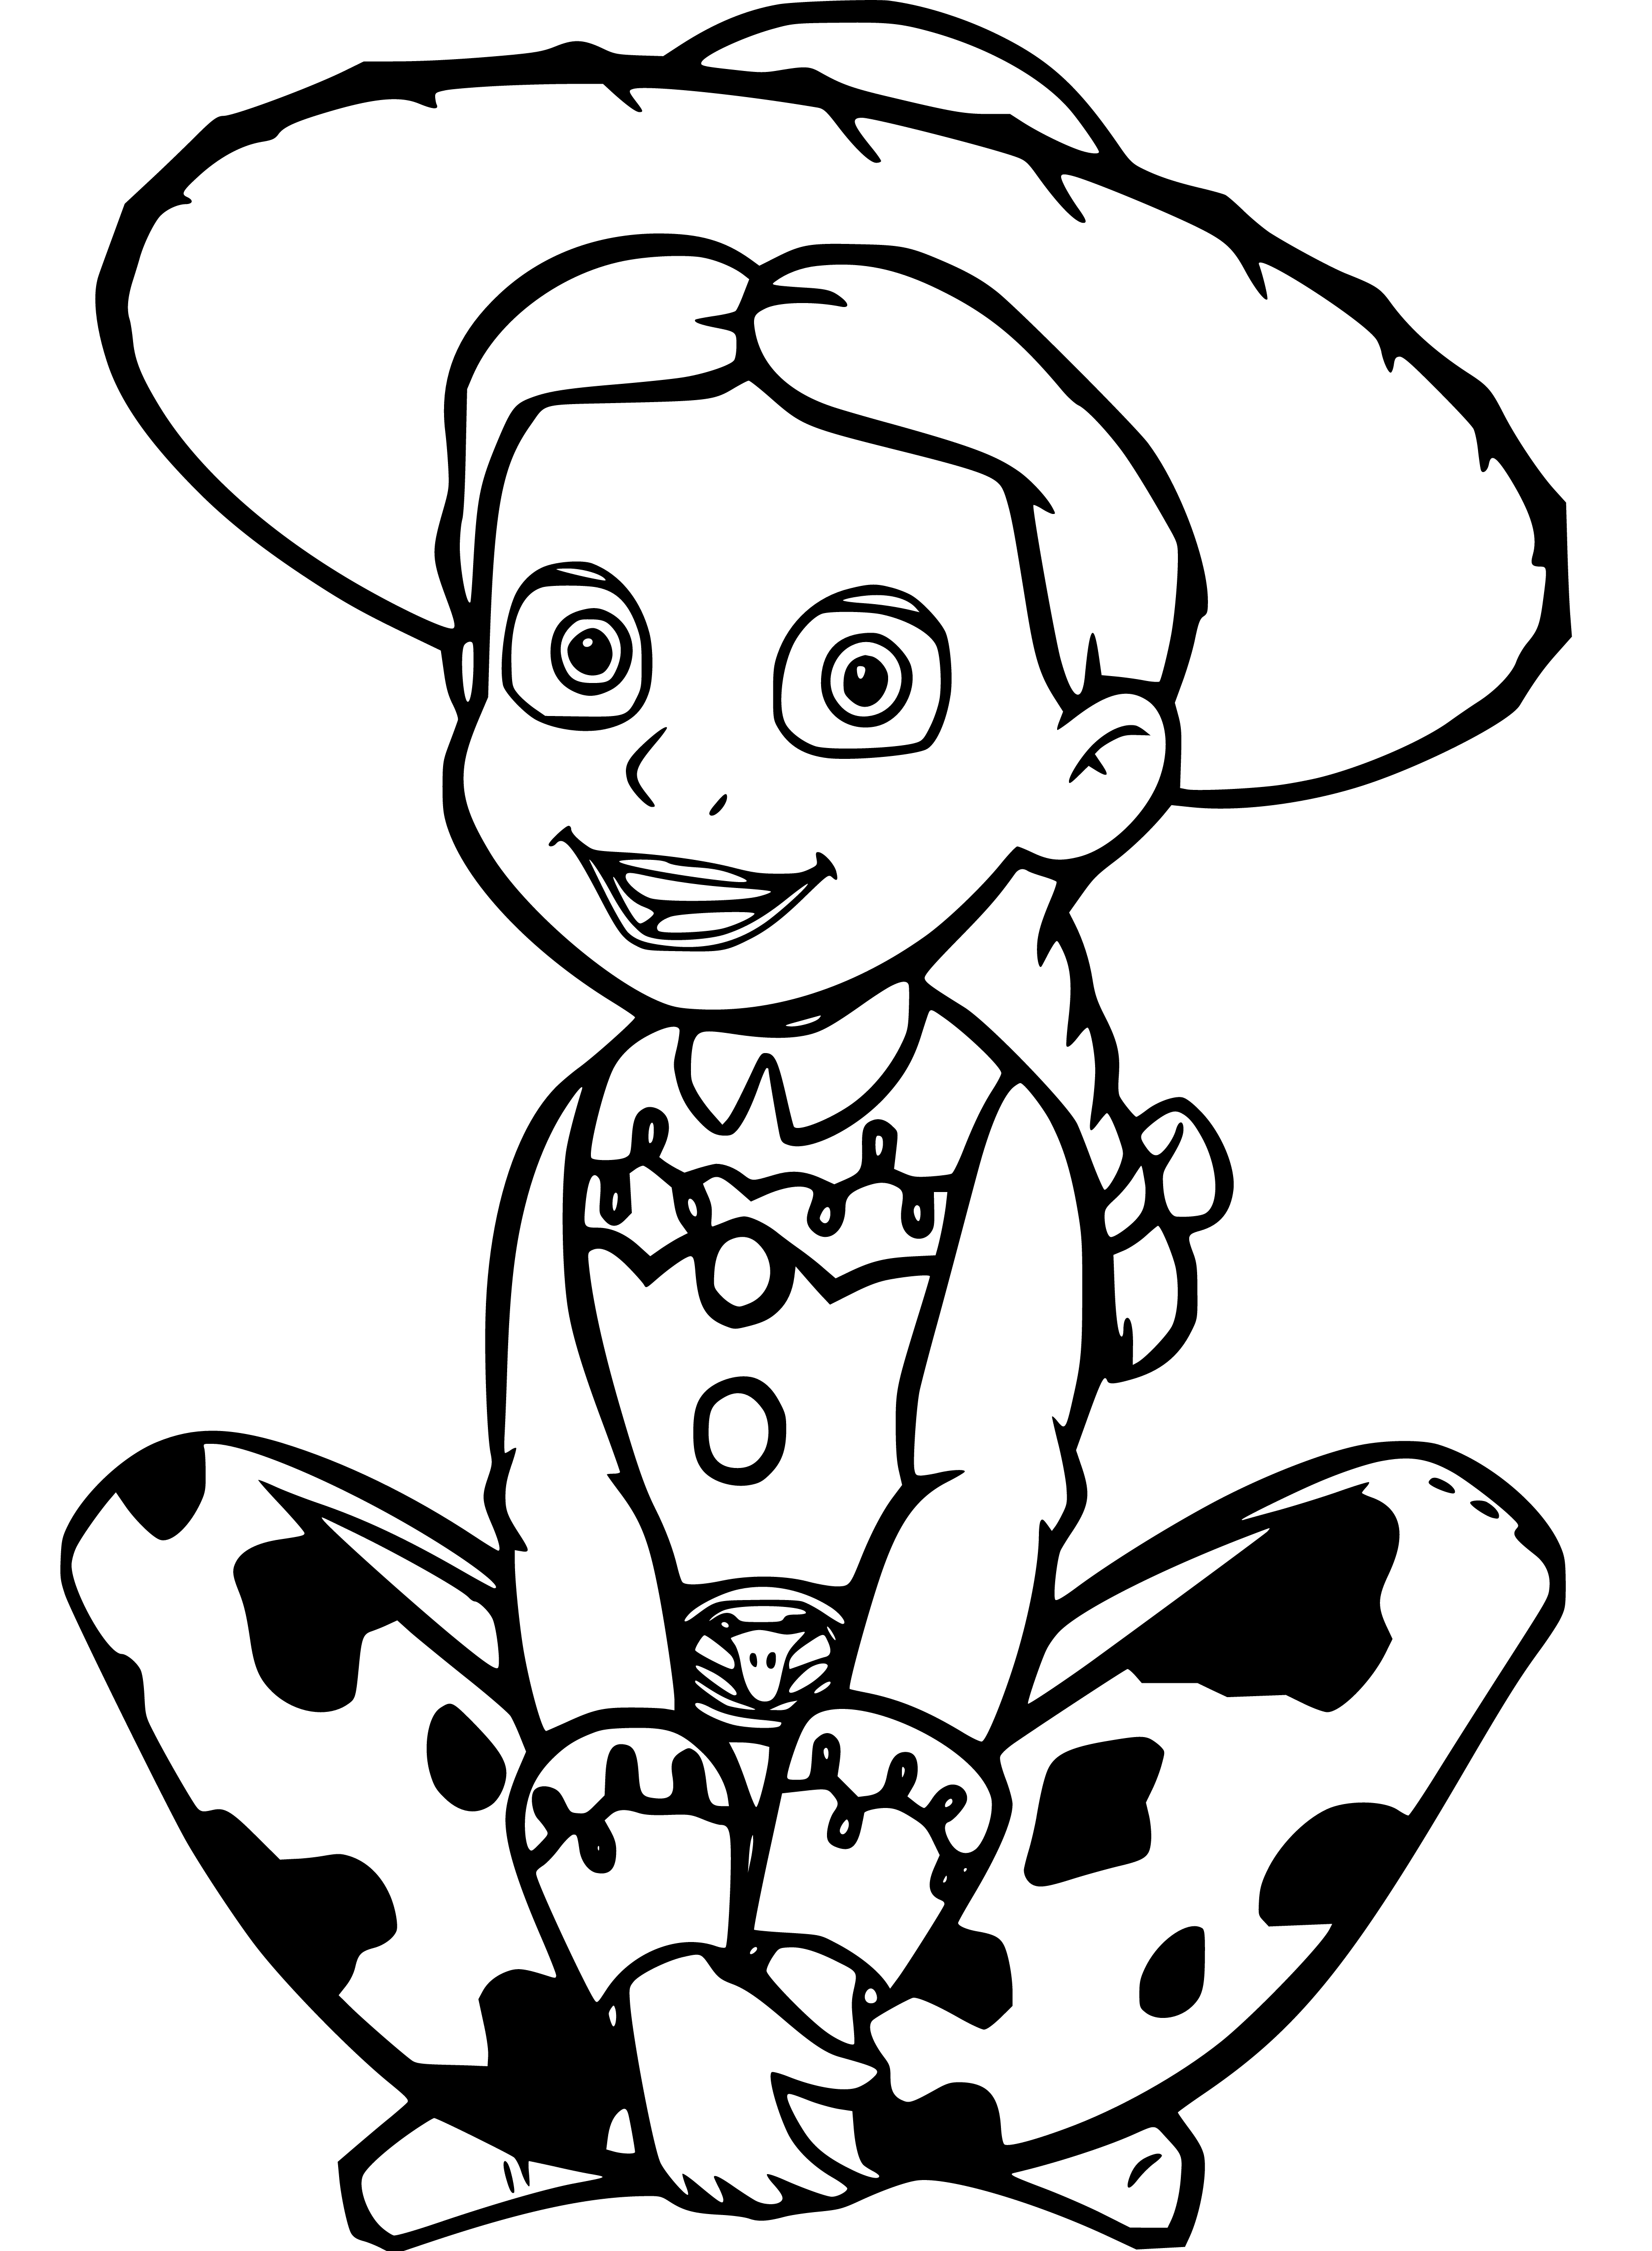 Toy Story S Jessie Coloring Page Jessie Toy Story